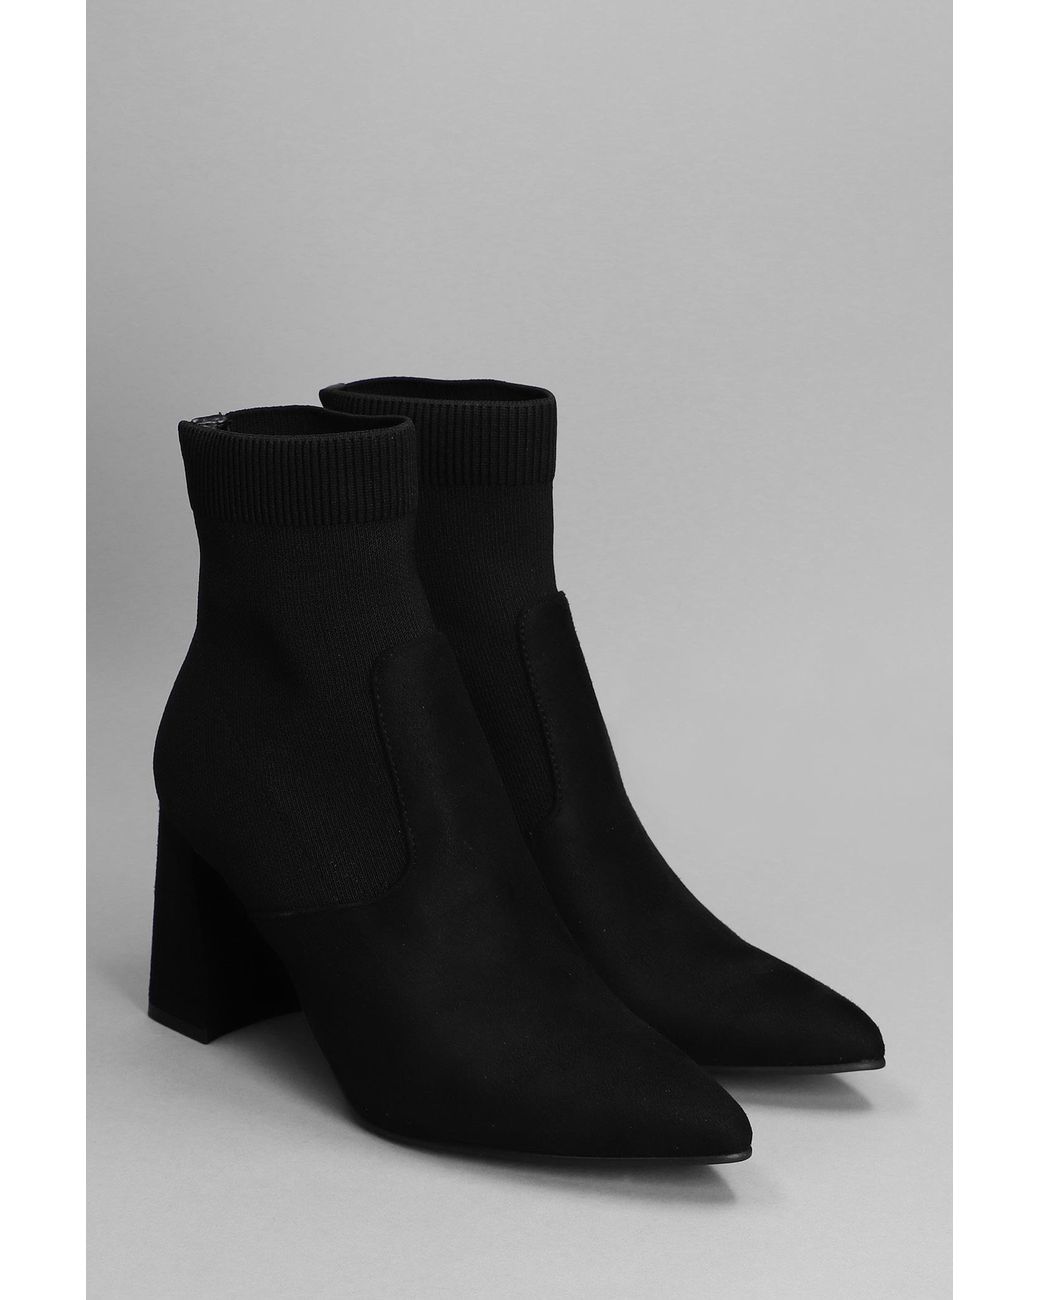 Steve Madden Ramp Up High Heels Ankle Boots In Black Suede And Fabric | Lyst